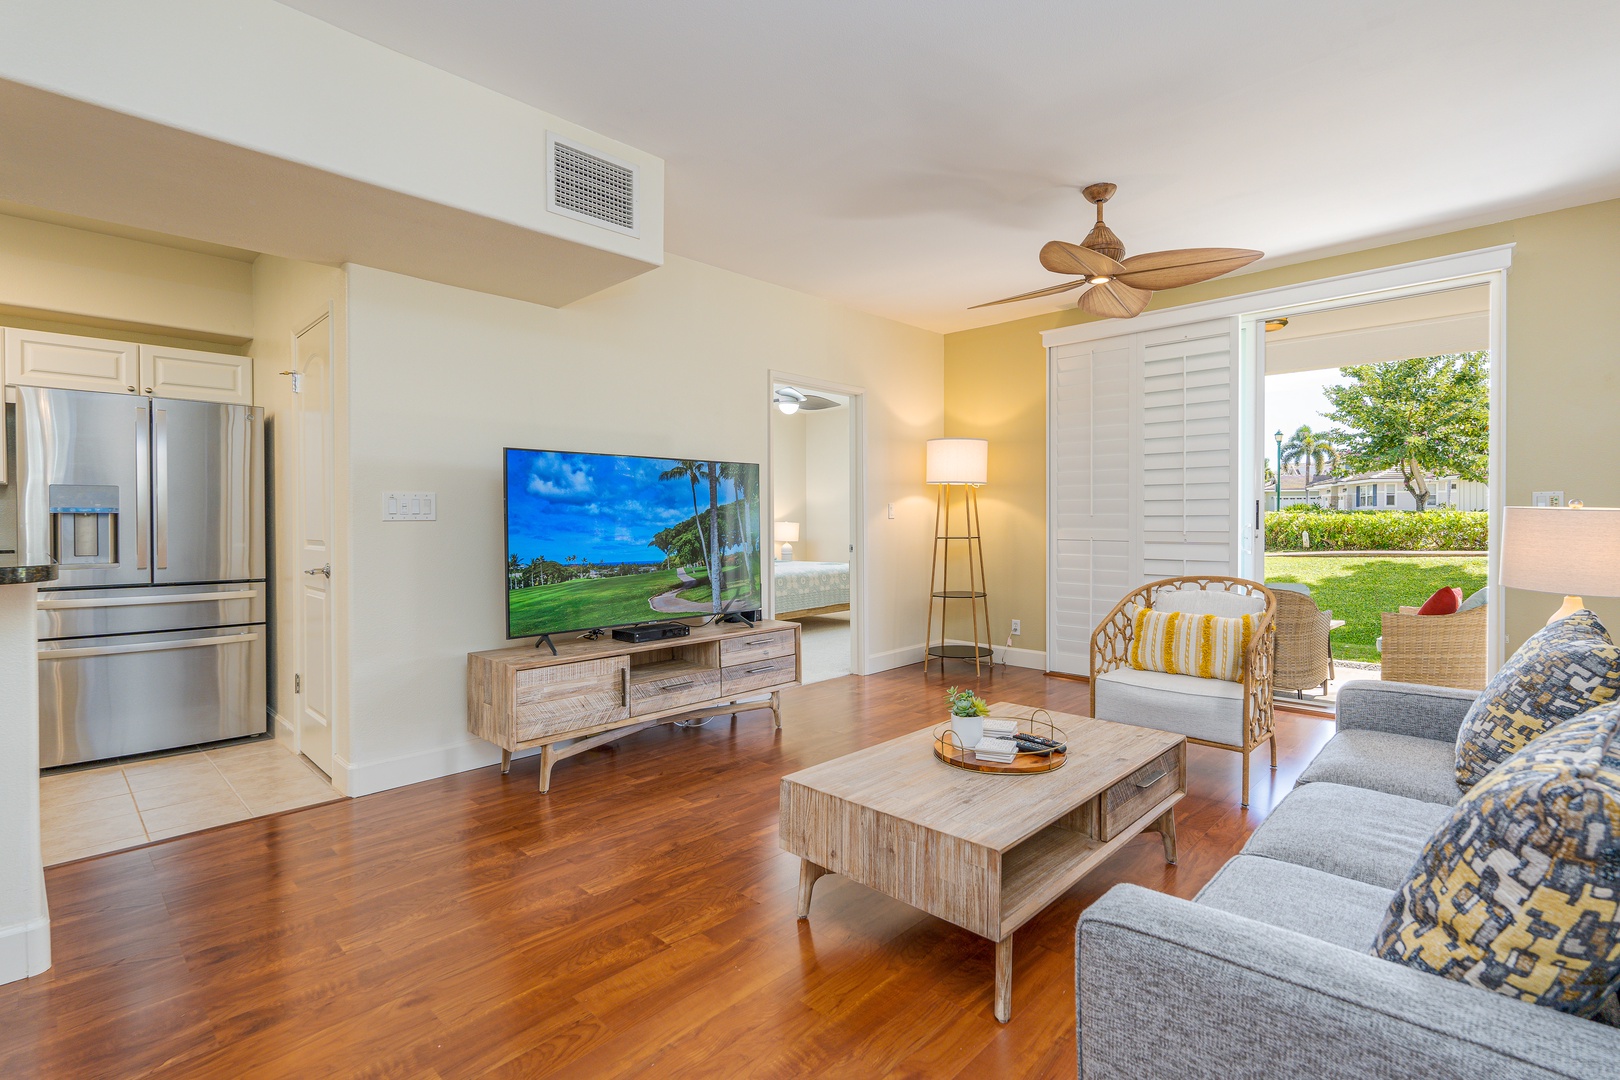 Kapolei Vacation Rentals, Ko Olina Kai 1105F - The living area with TV, plush couch and direct access to the lanai.